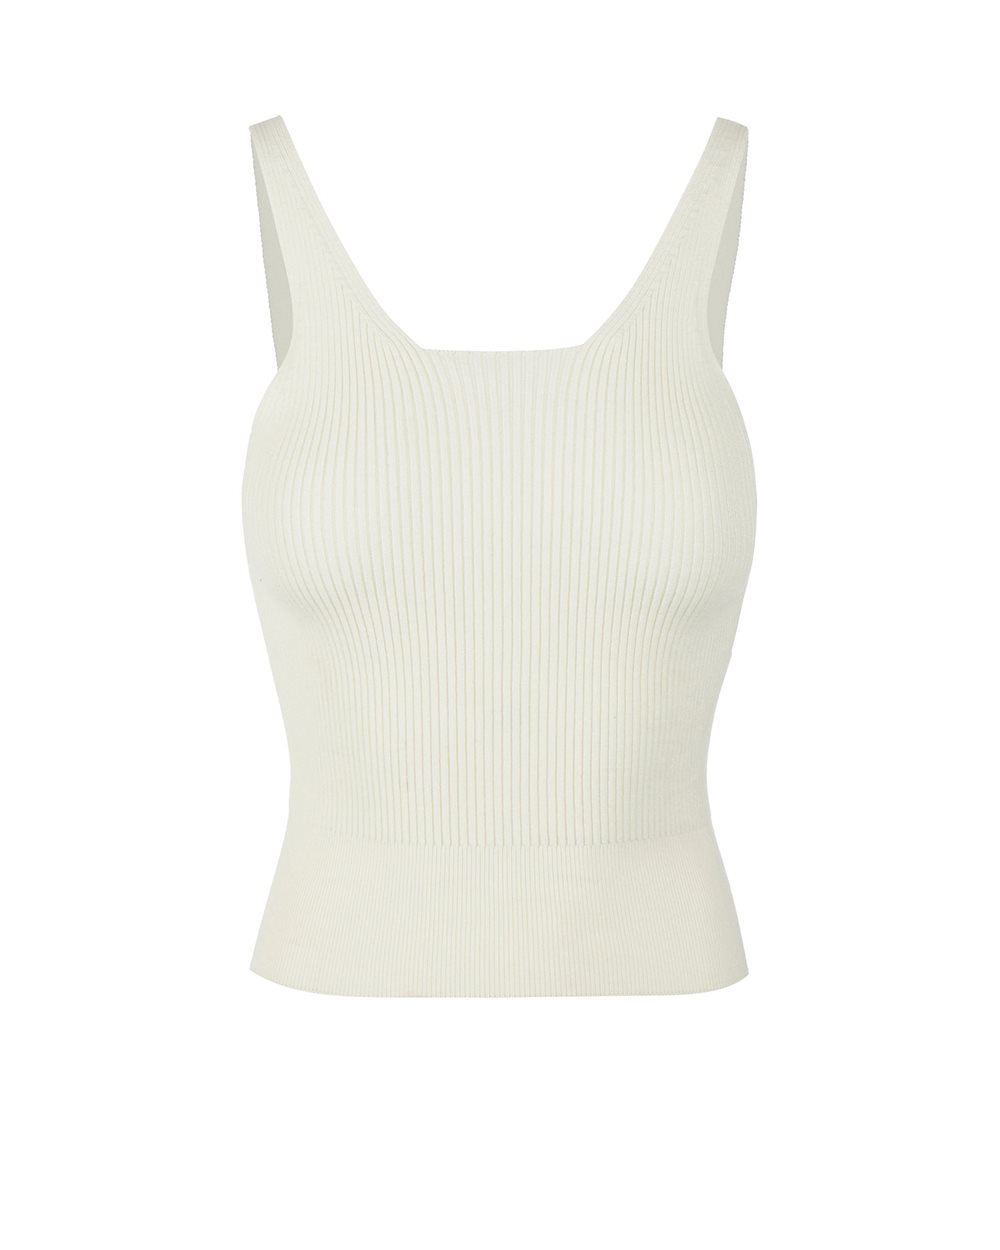 Milky white tank top with logo - Fashion Show Woman | Iceberg - Official Website